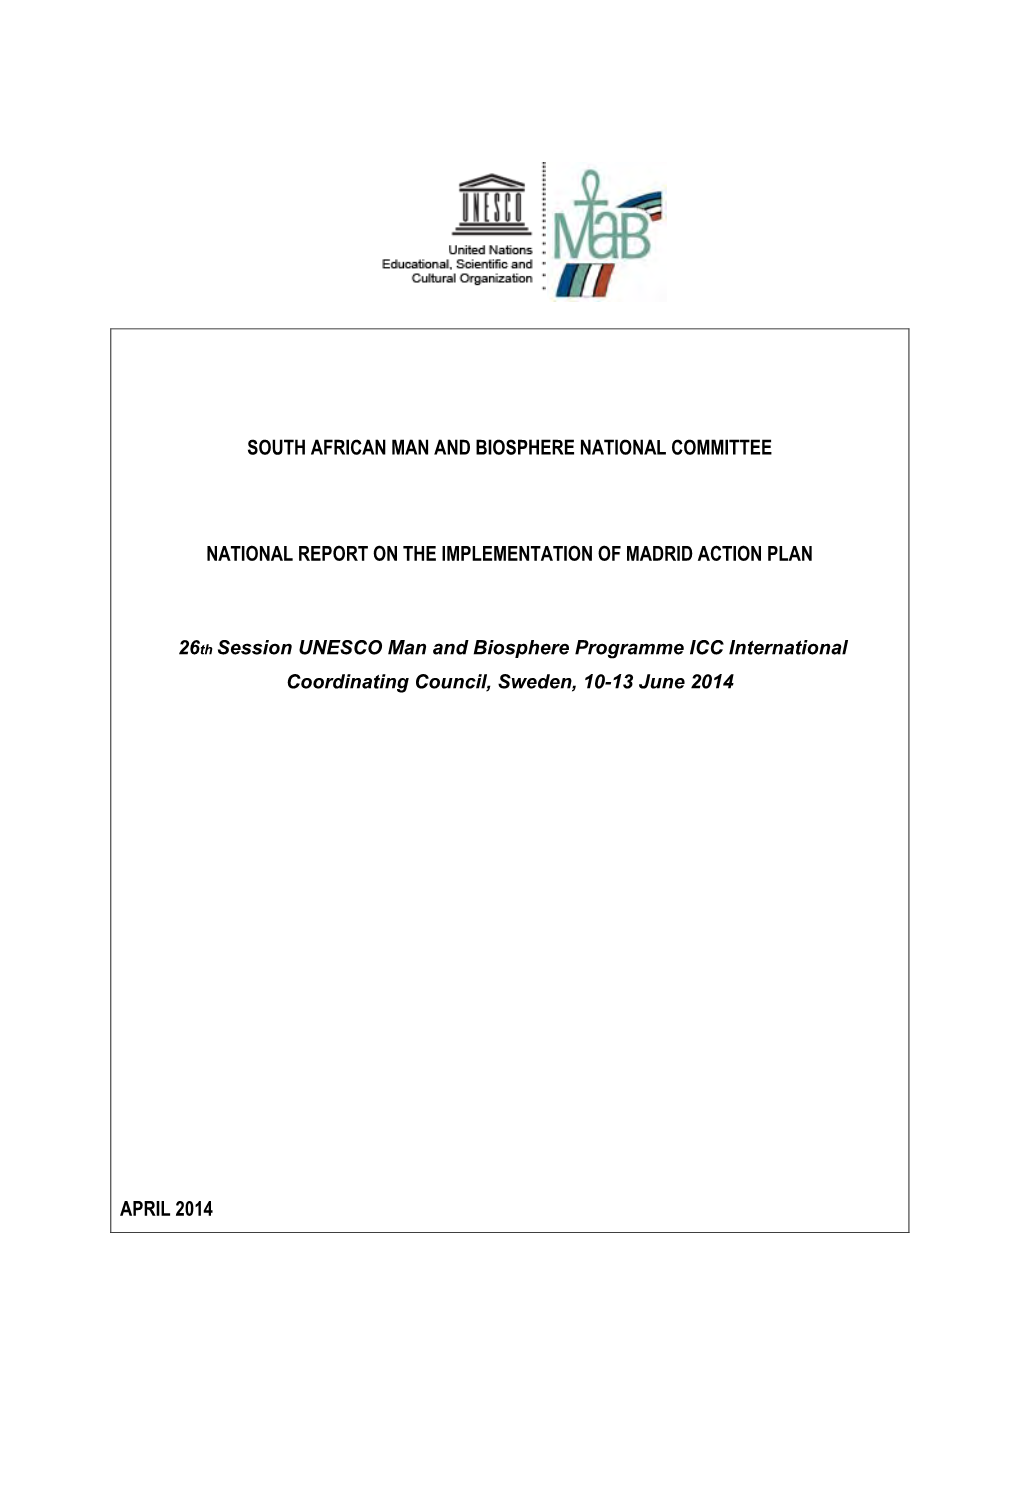 South African Man and Biosphere National Committee National Report on the Implementation of Madrid Action Plan April 2014